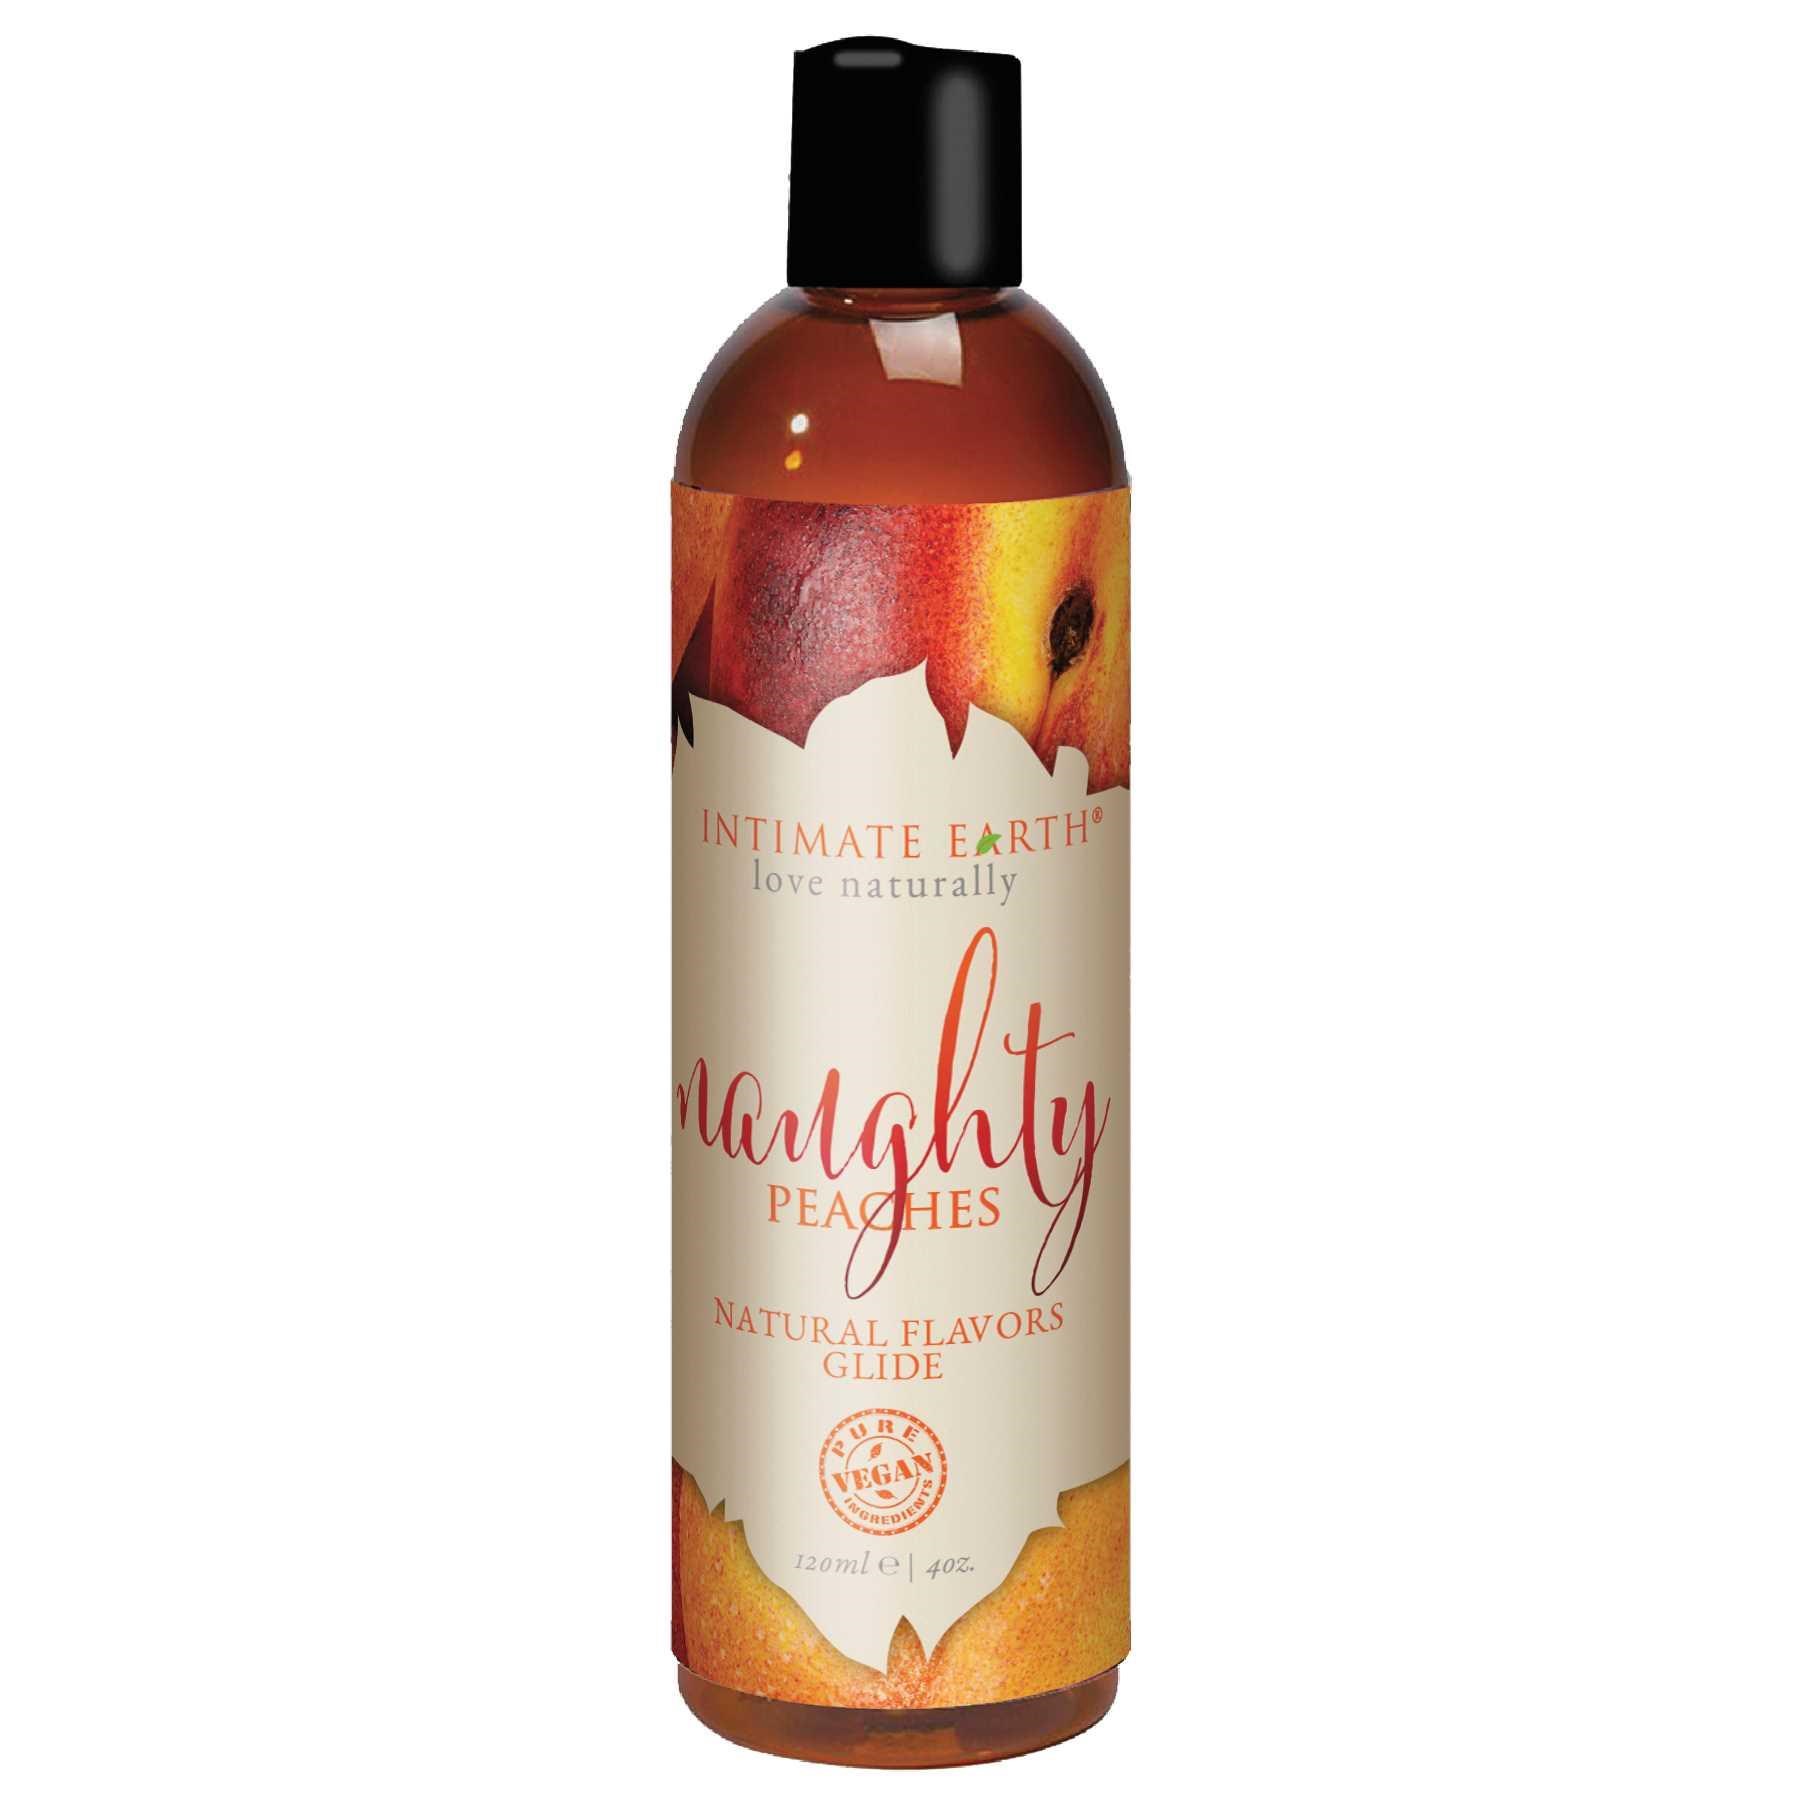 Intimate Earth Natural Flavor Glide peach front bottle